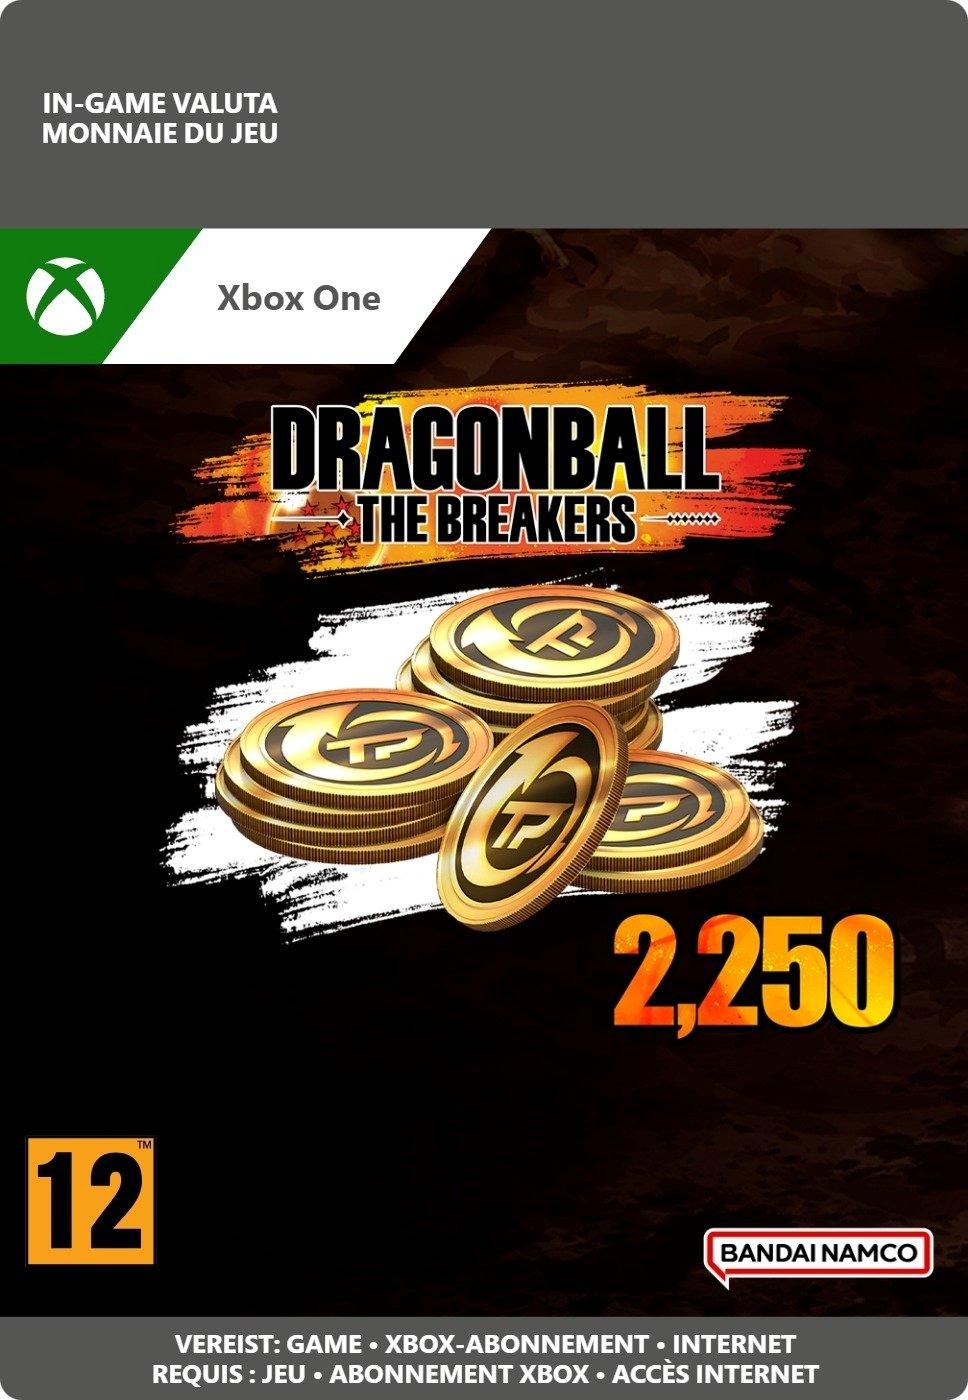 Dragon Ball: The Breakers - TP Token 2250 - Xbox One - Currency | 7F6-00511 (9fbae04c-0bad-874d-b49f-446fa28258ea)